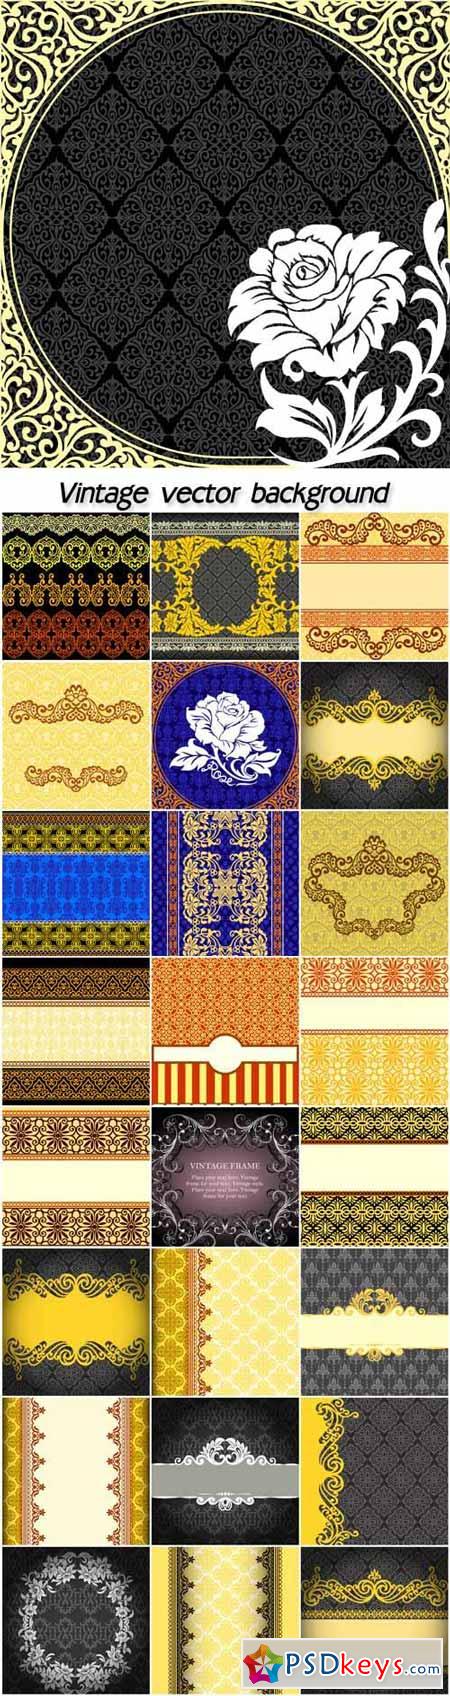 Vintage backgrounds, vector patterns and ornaments